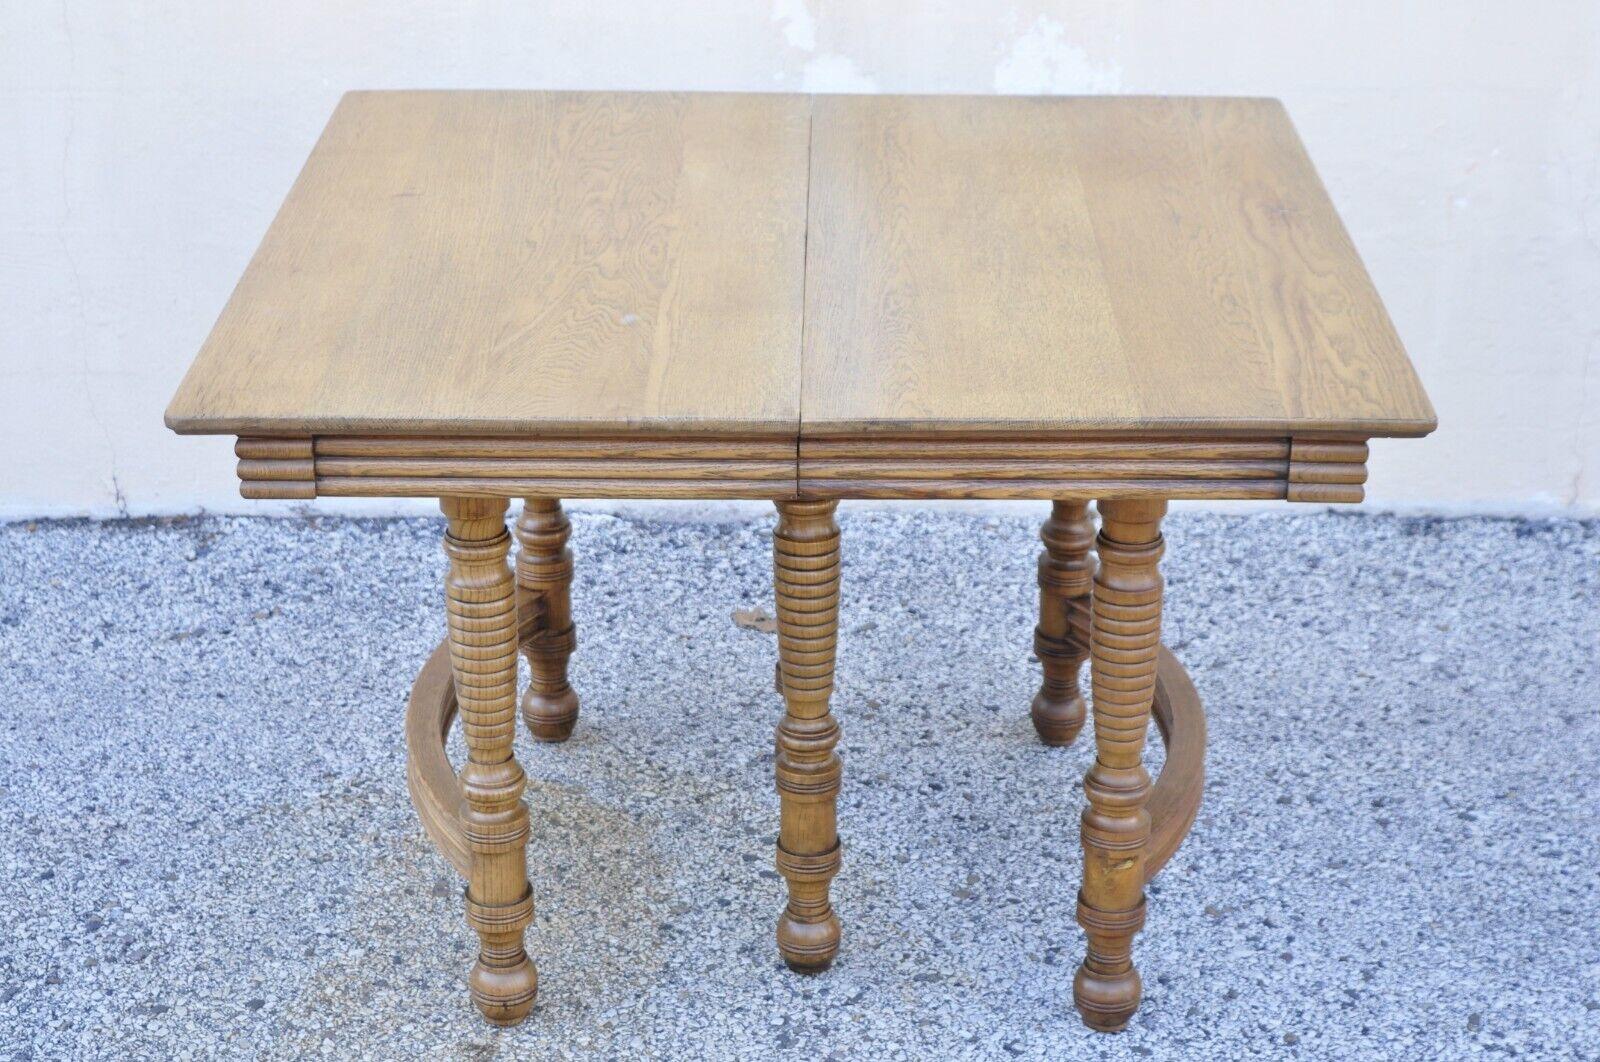 Antique American Victorian oak wood square extension dining table with 3 leaves. Item features (3) 11